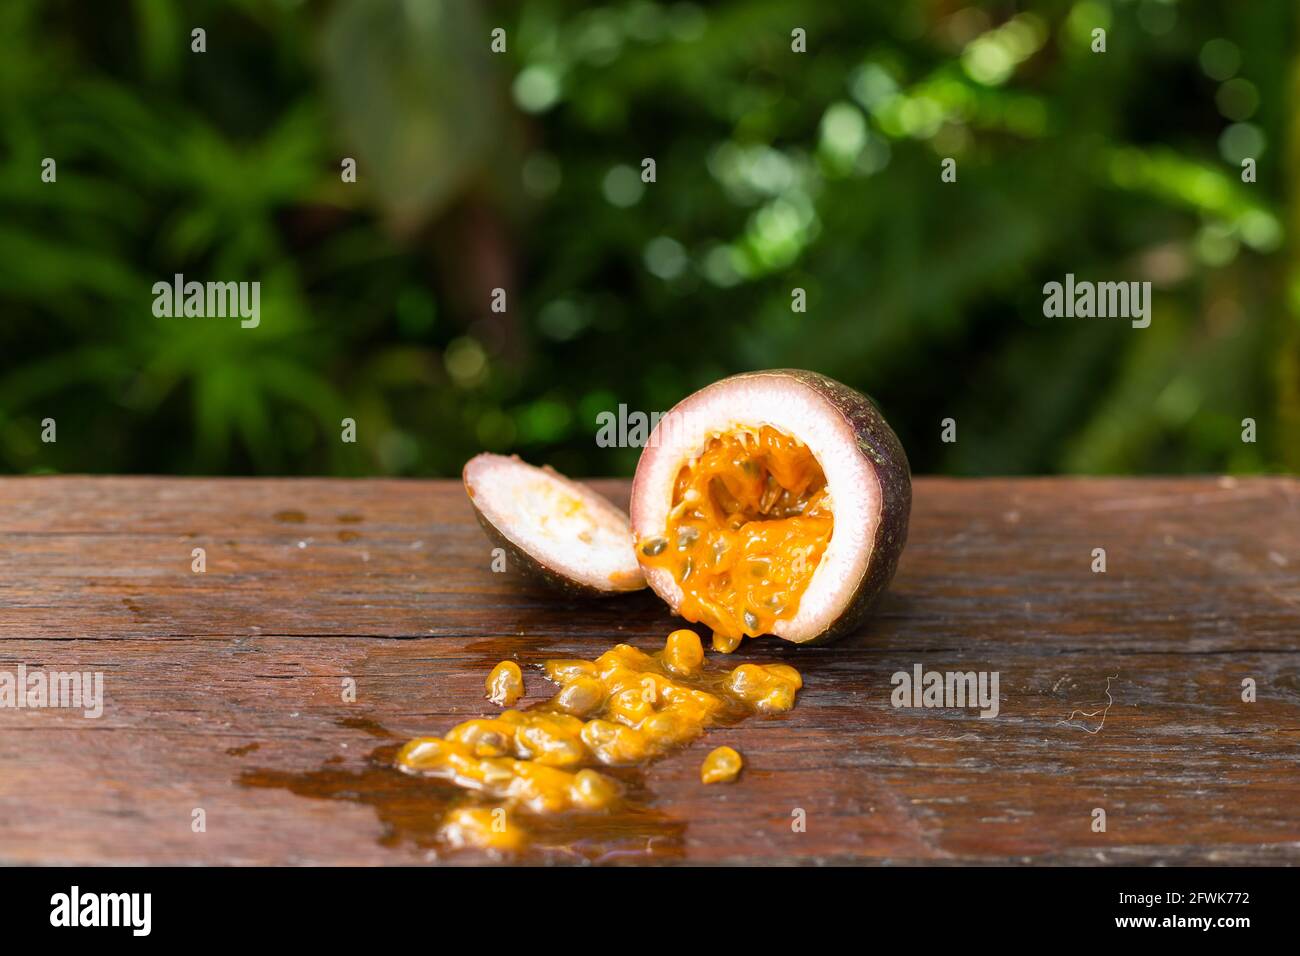 Cup passionfruit on wooden table in garden Stock Photo